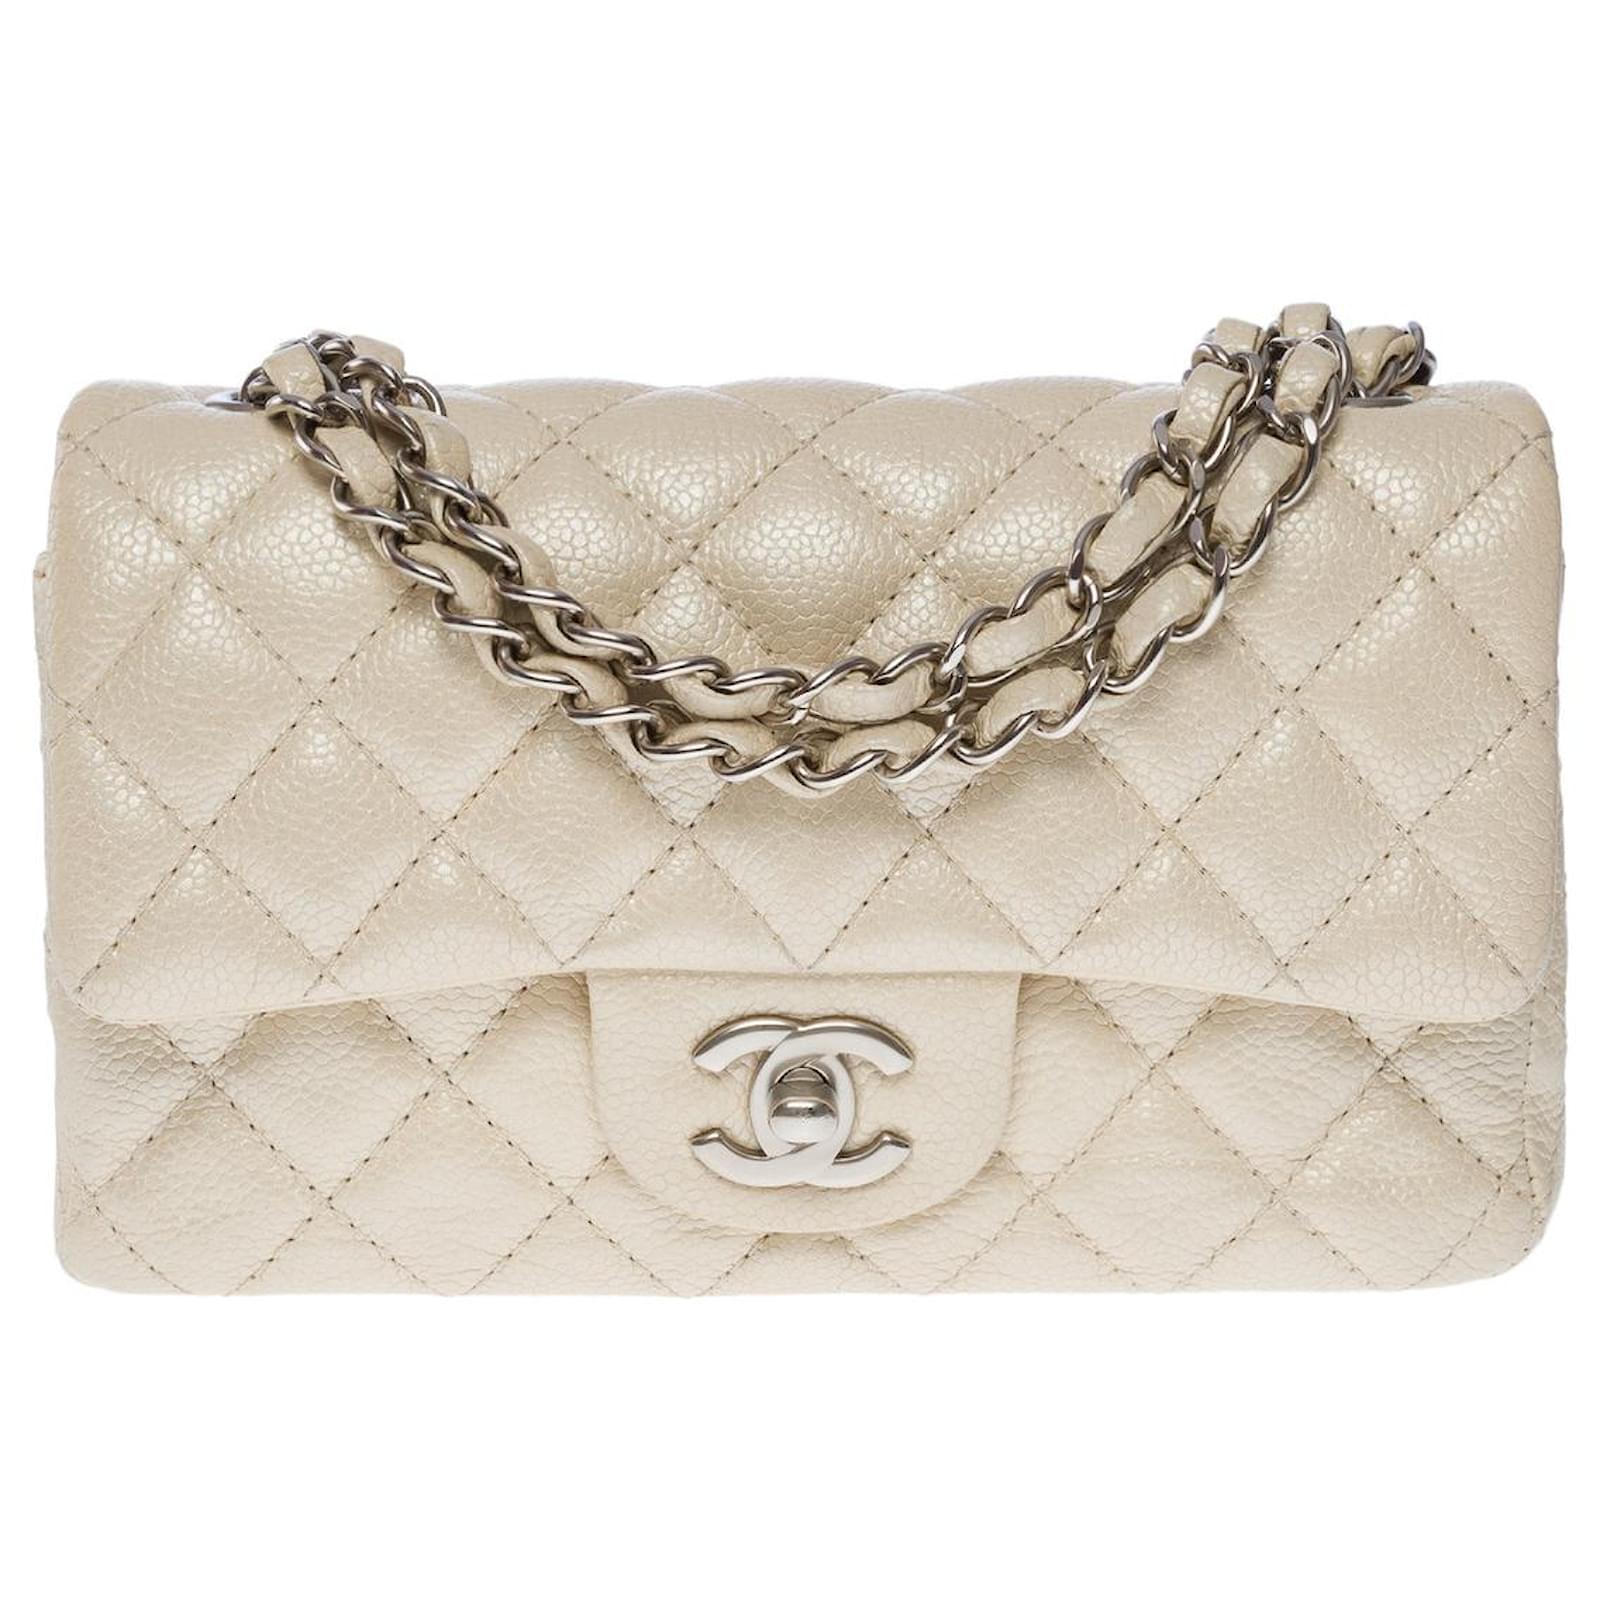 Chanel off-white quilted leather TIMELESS CLASSIC FLAP MEDIUM Shoulder Bag